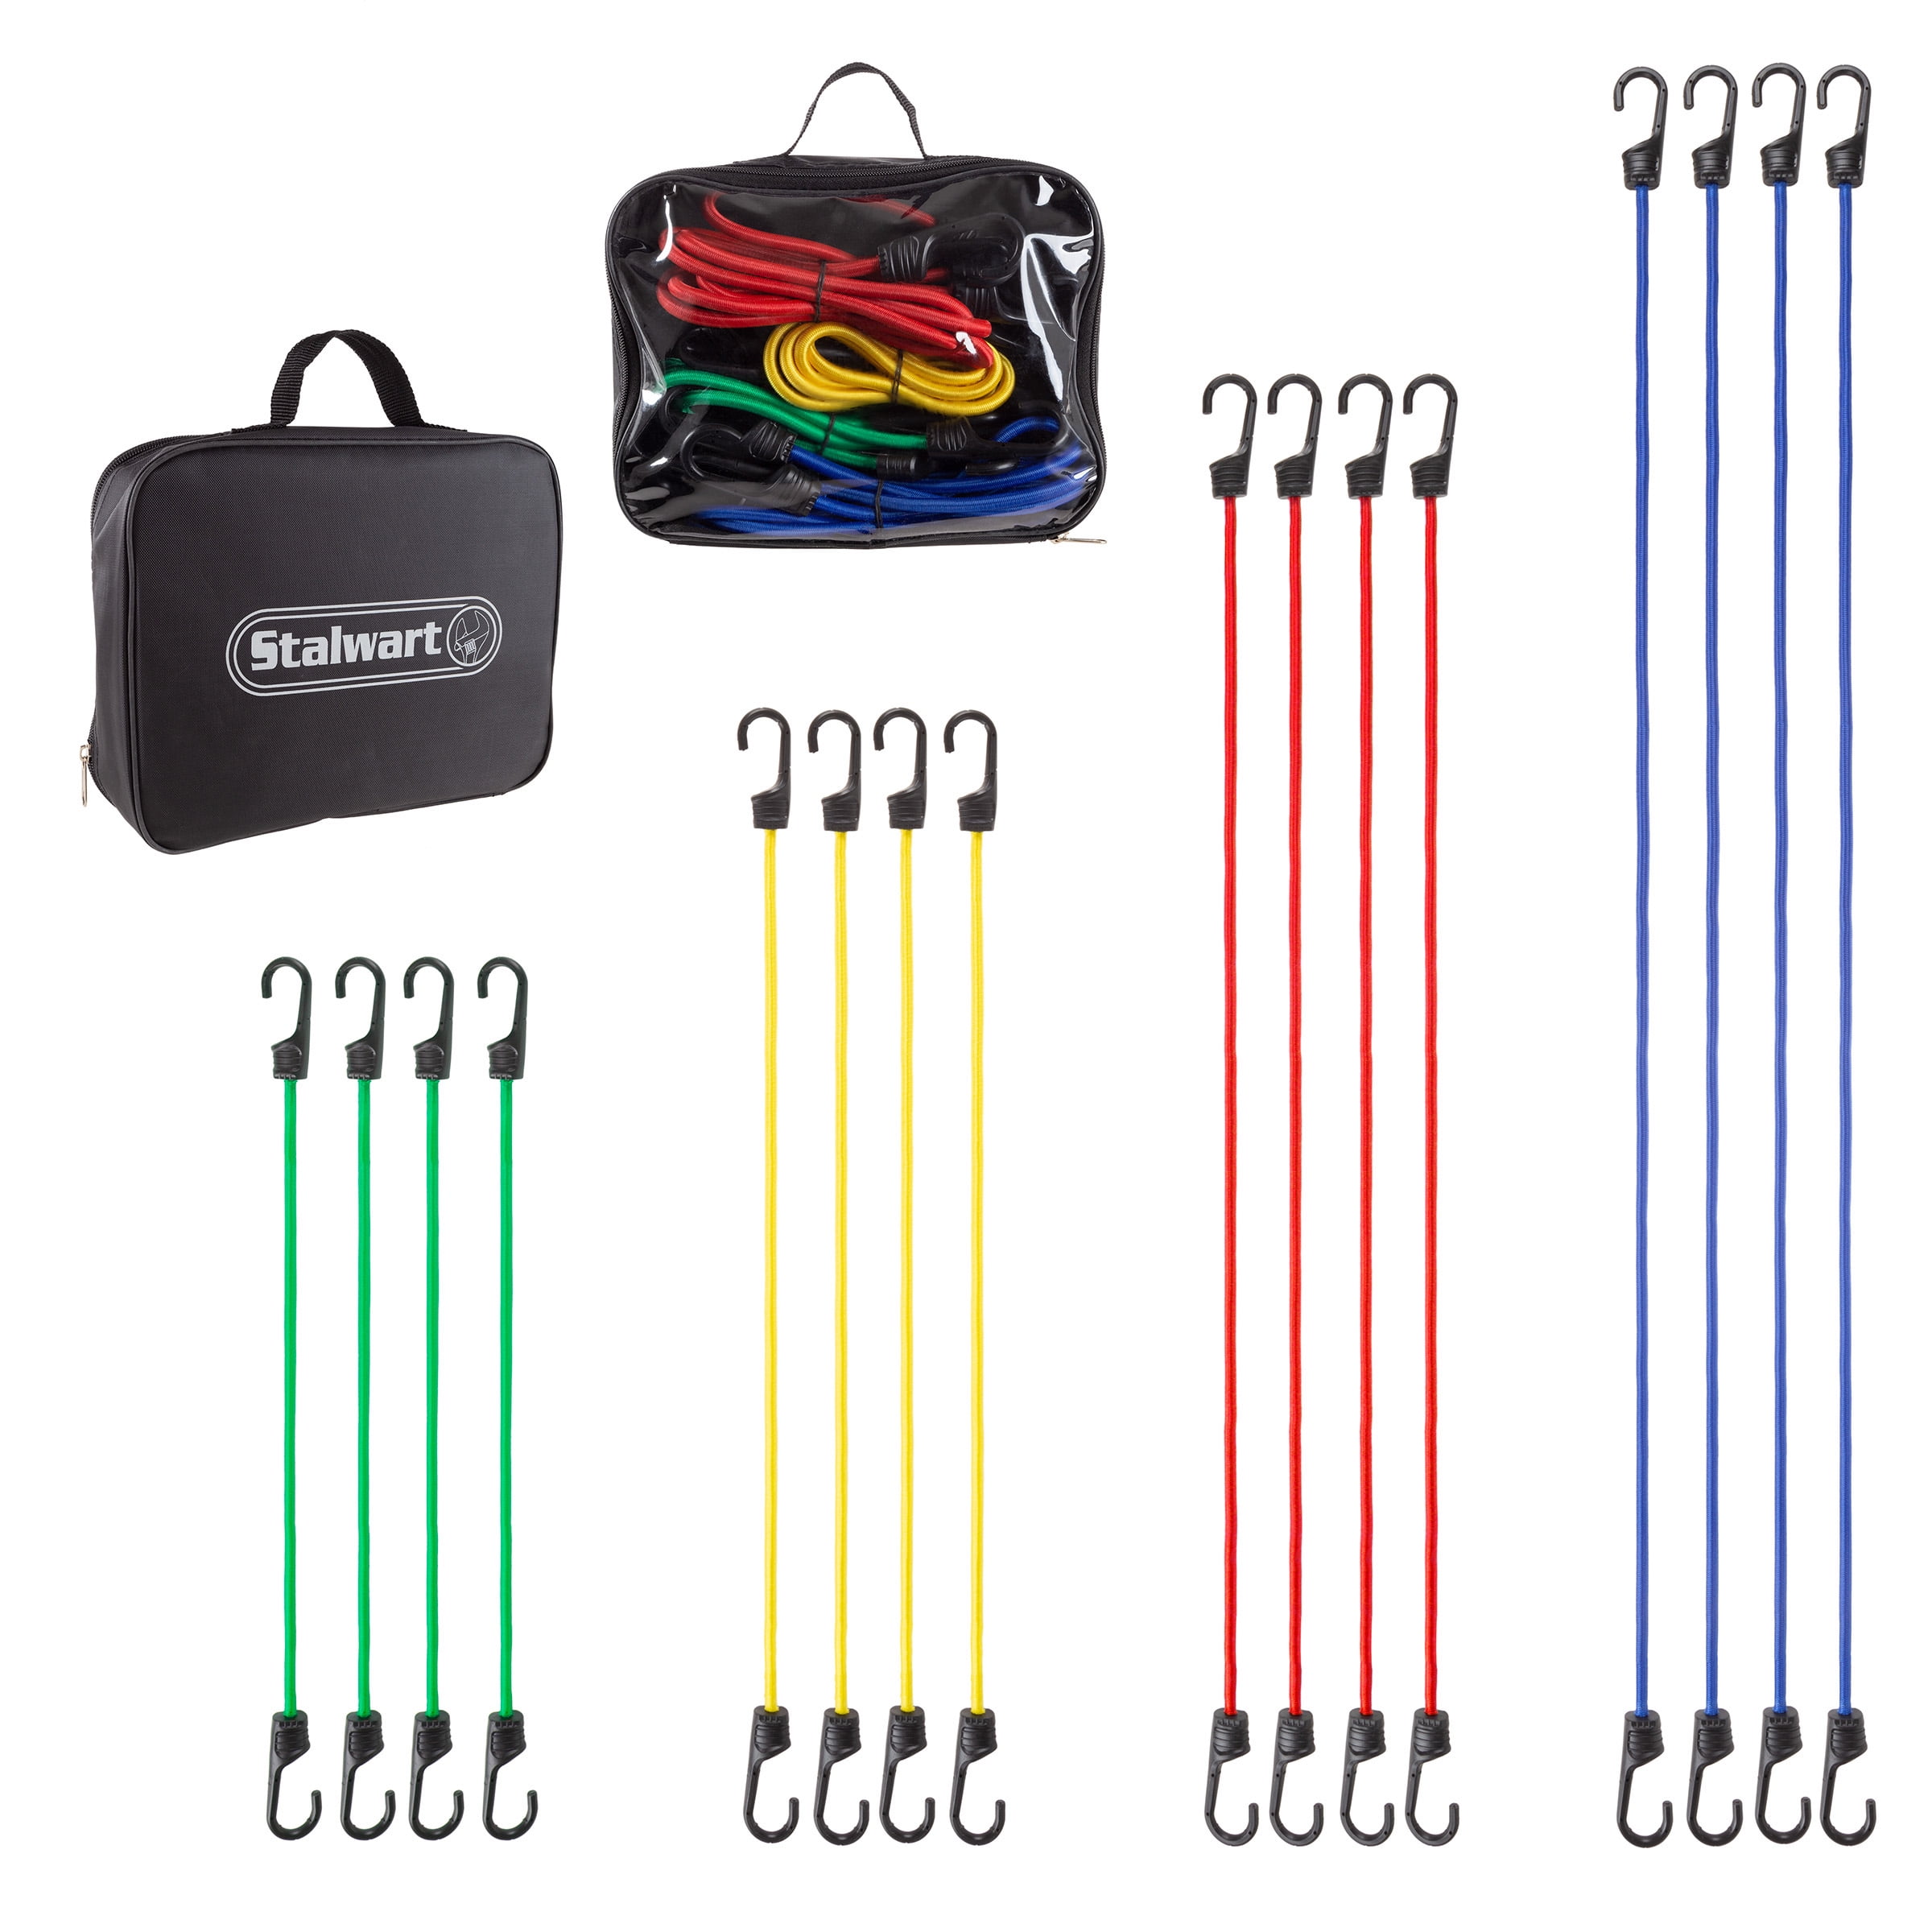 32” 4 pcs Tarp Clips Includes 18” 4 pcs Ball Ties XSTRAP Bungee Cords Assortment Bag 28 Pieces 40” Bungee Cords and 6 pcs Mini Bungees 24” 